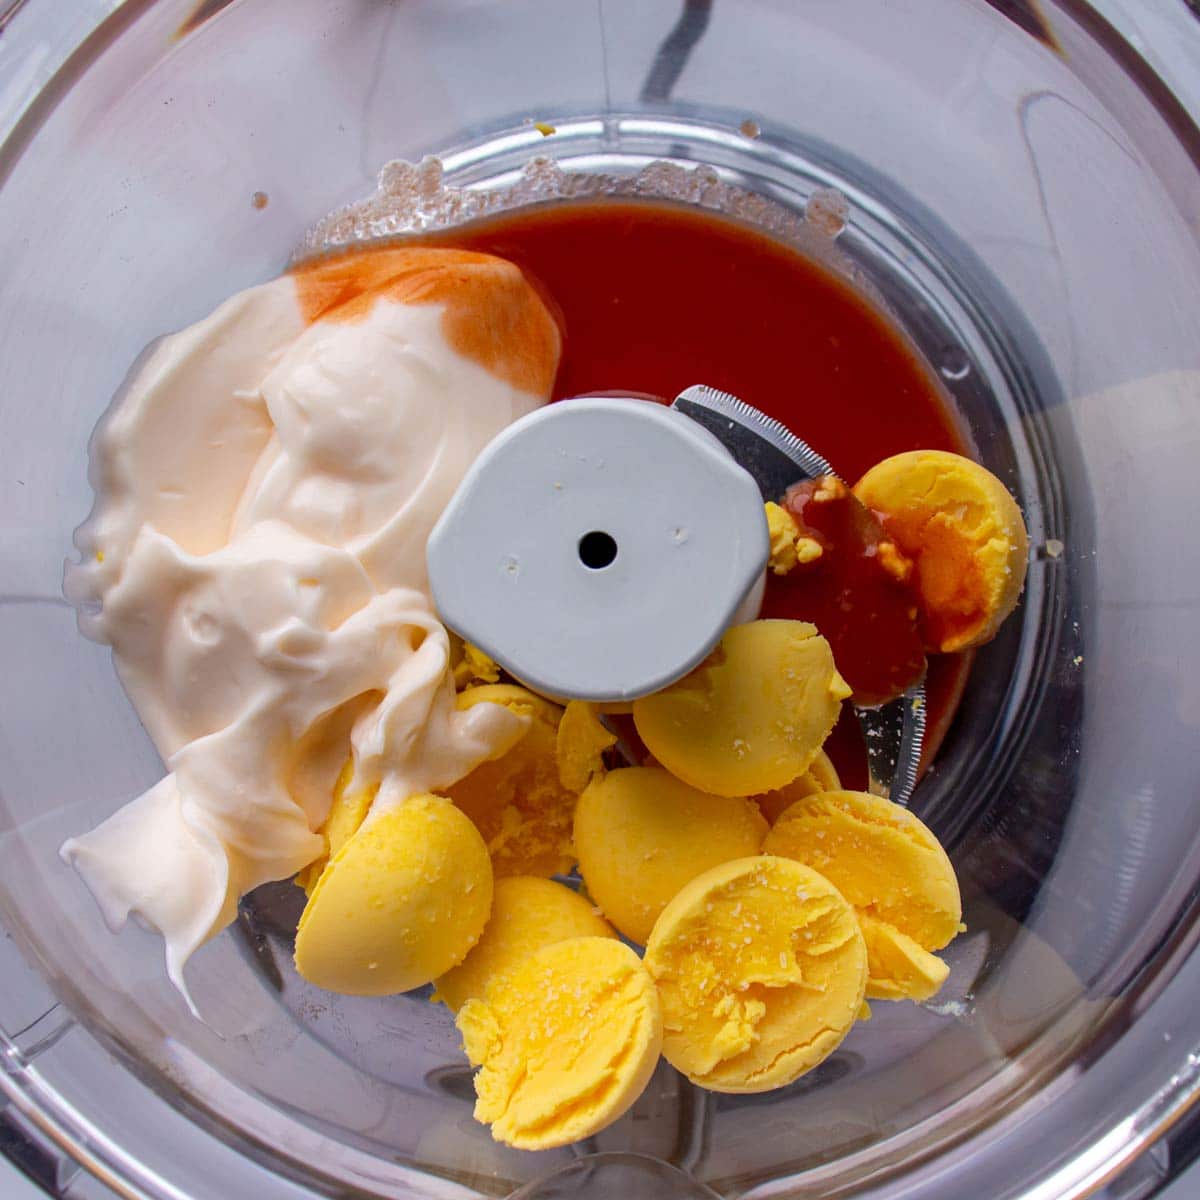 Hard-boiled egg yolks, mayonnaise, and hot sauce in the bowl of a food processor.